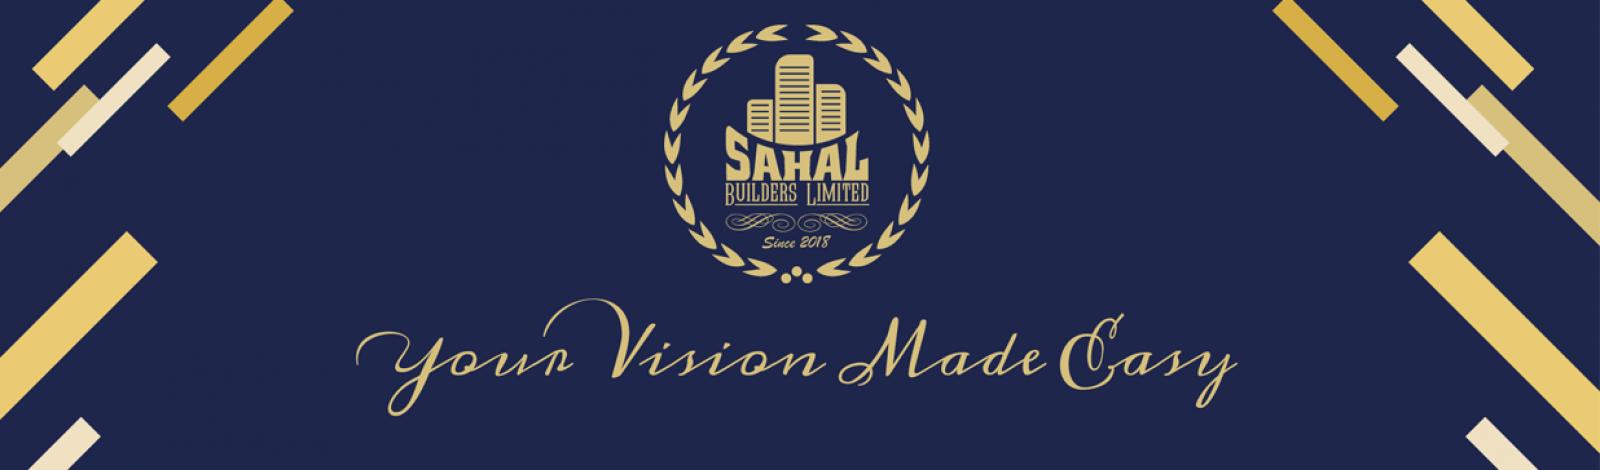 Sahal Builders Limited banner